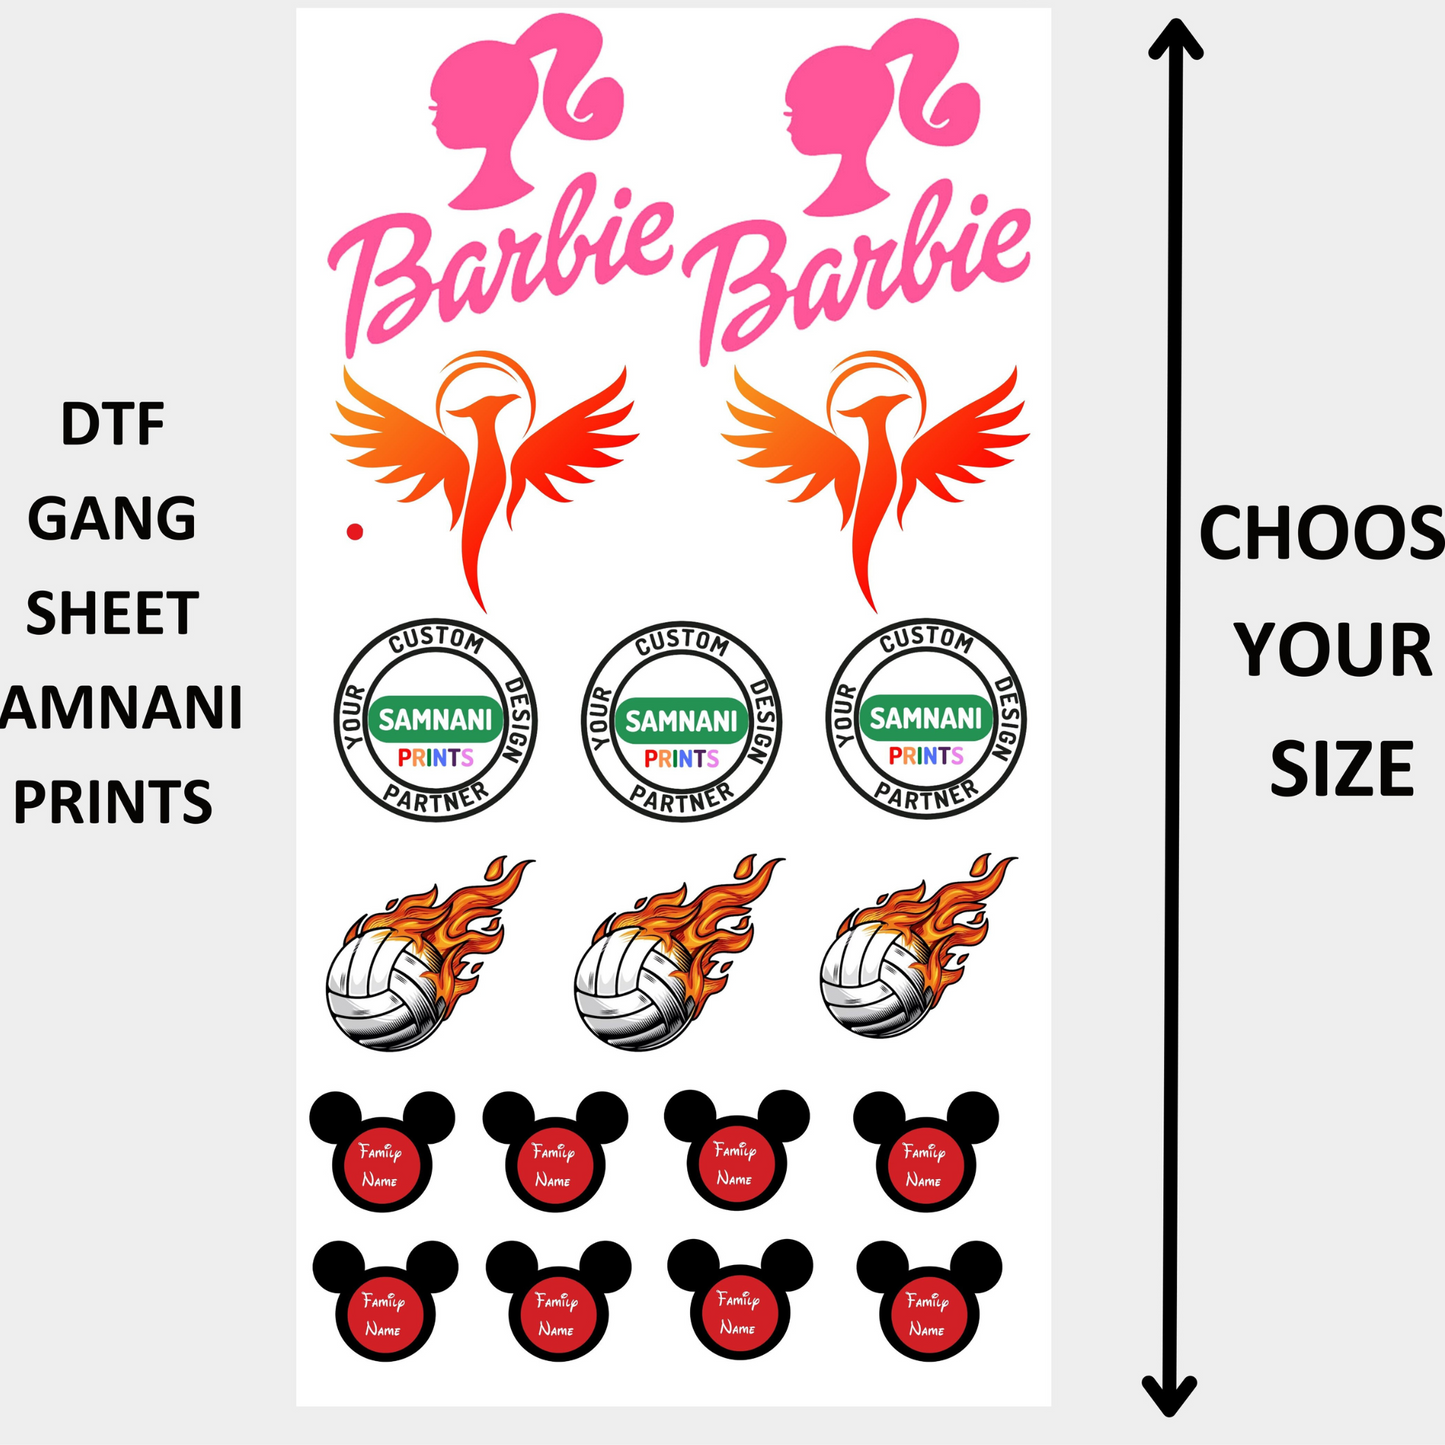 DTF Transfer Gang Sheet! Print on Tshirt, Apron, Bags and much more!